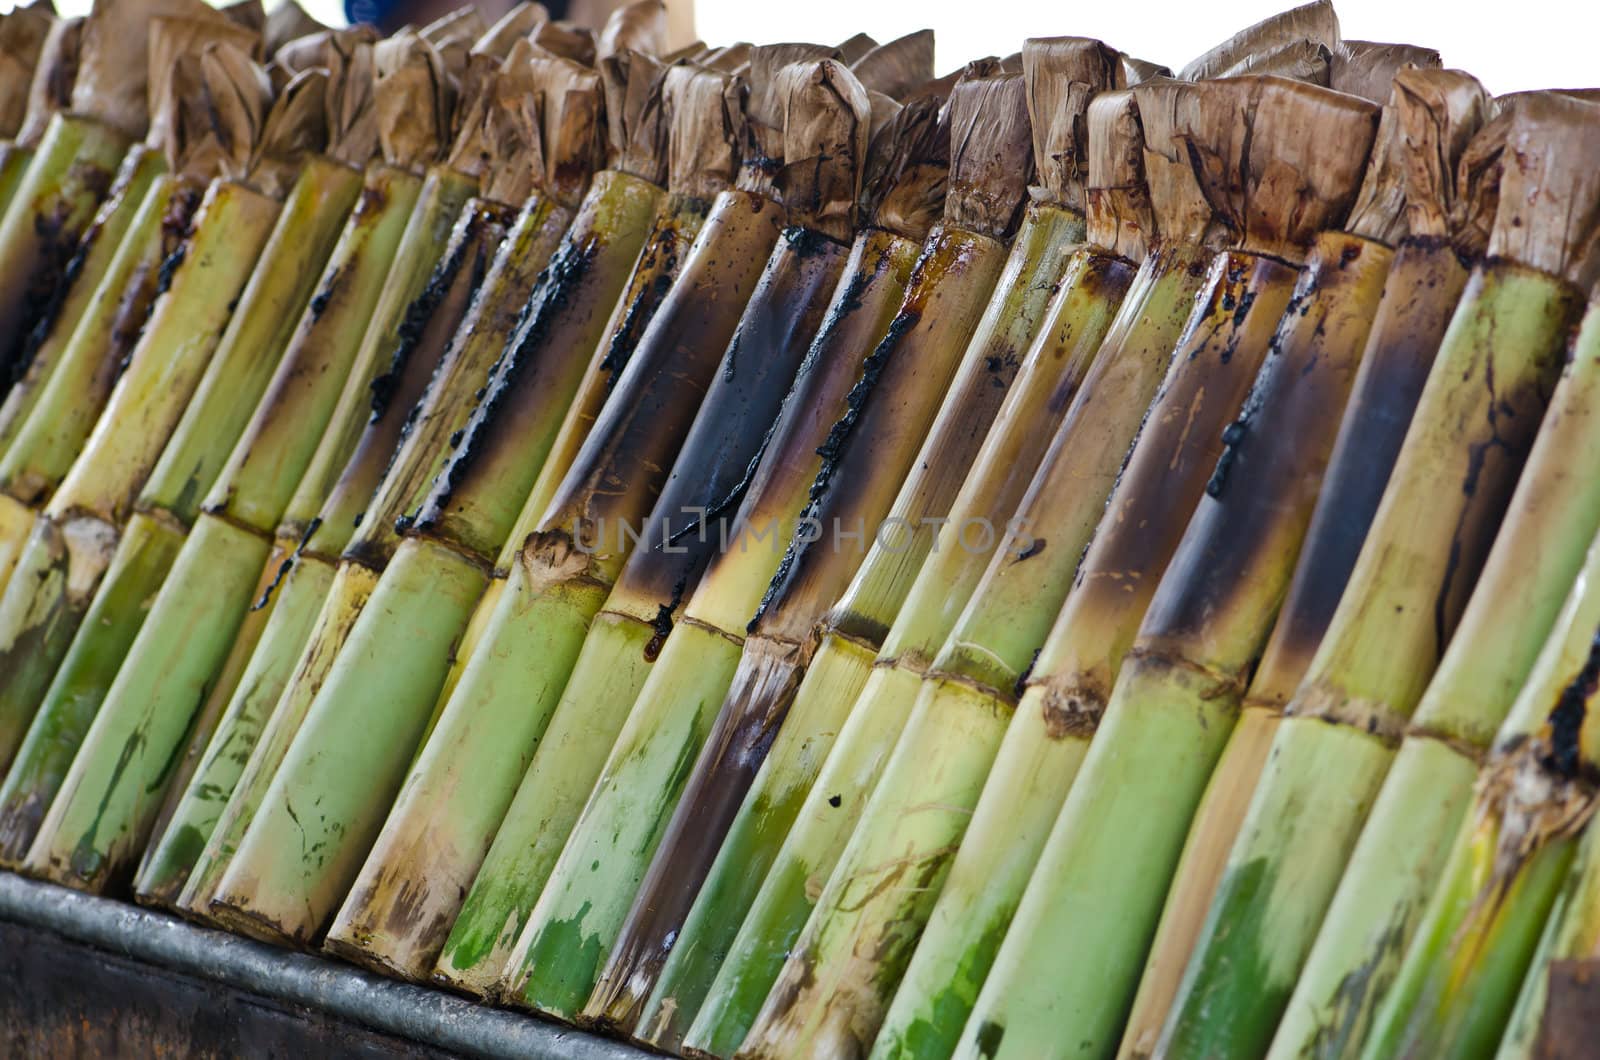 Glutinous rice roasted in bamboo joints, Thai food